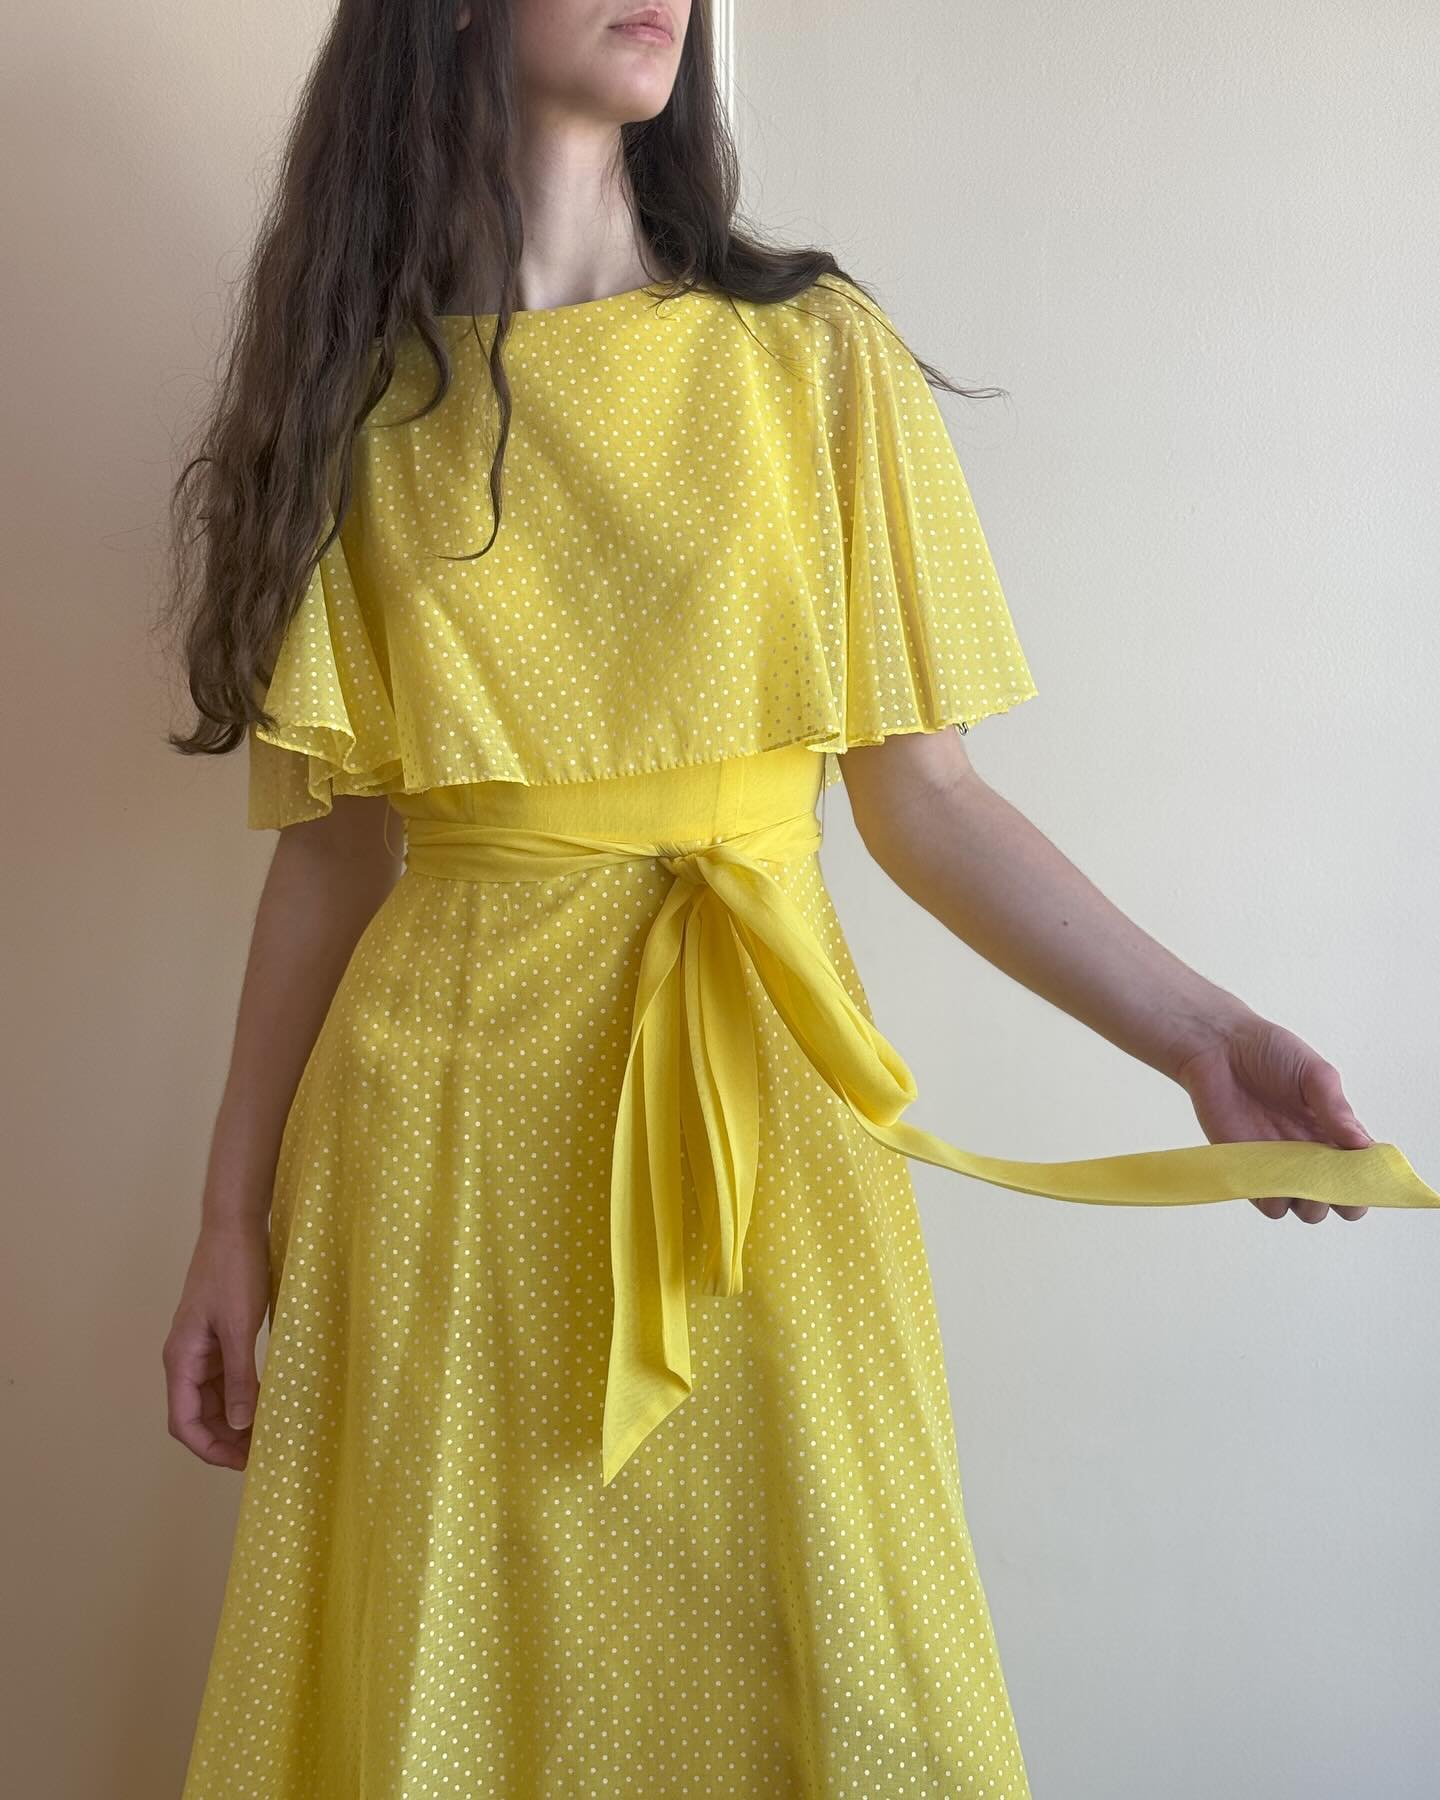 70s lemon maxi with tiny polka dots and cape top / M featured on Sydney / $78 / DM to purchase / Shipping available